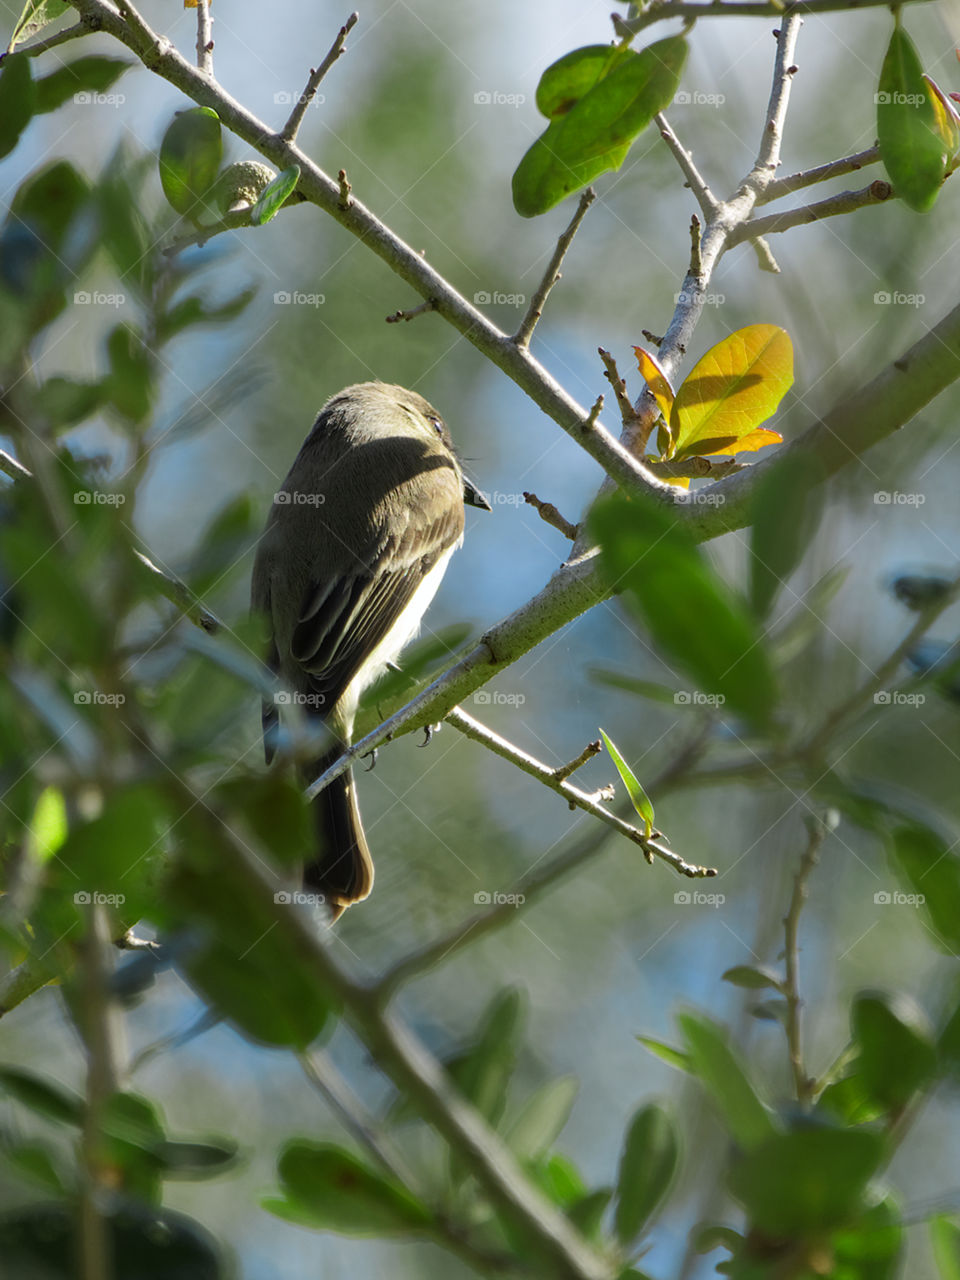 view of an Eastern Phoebe bird on a tree, wintering in Florida